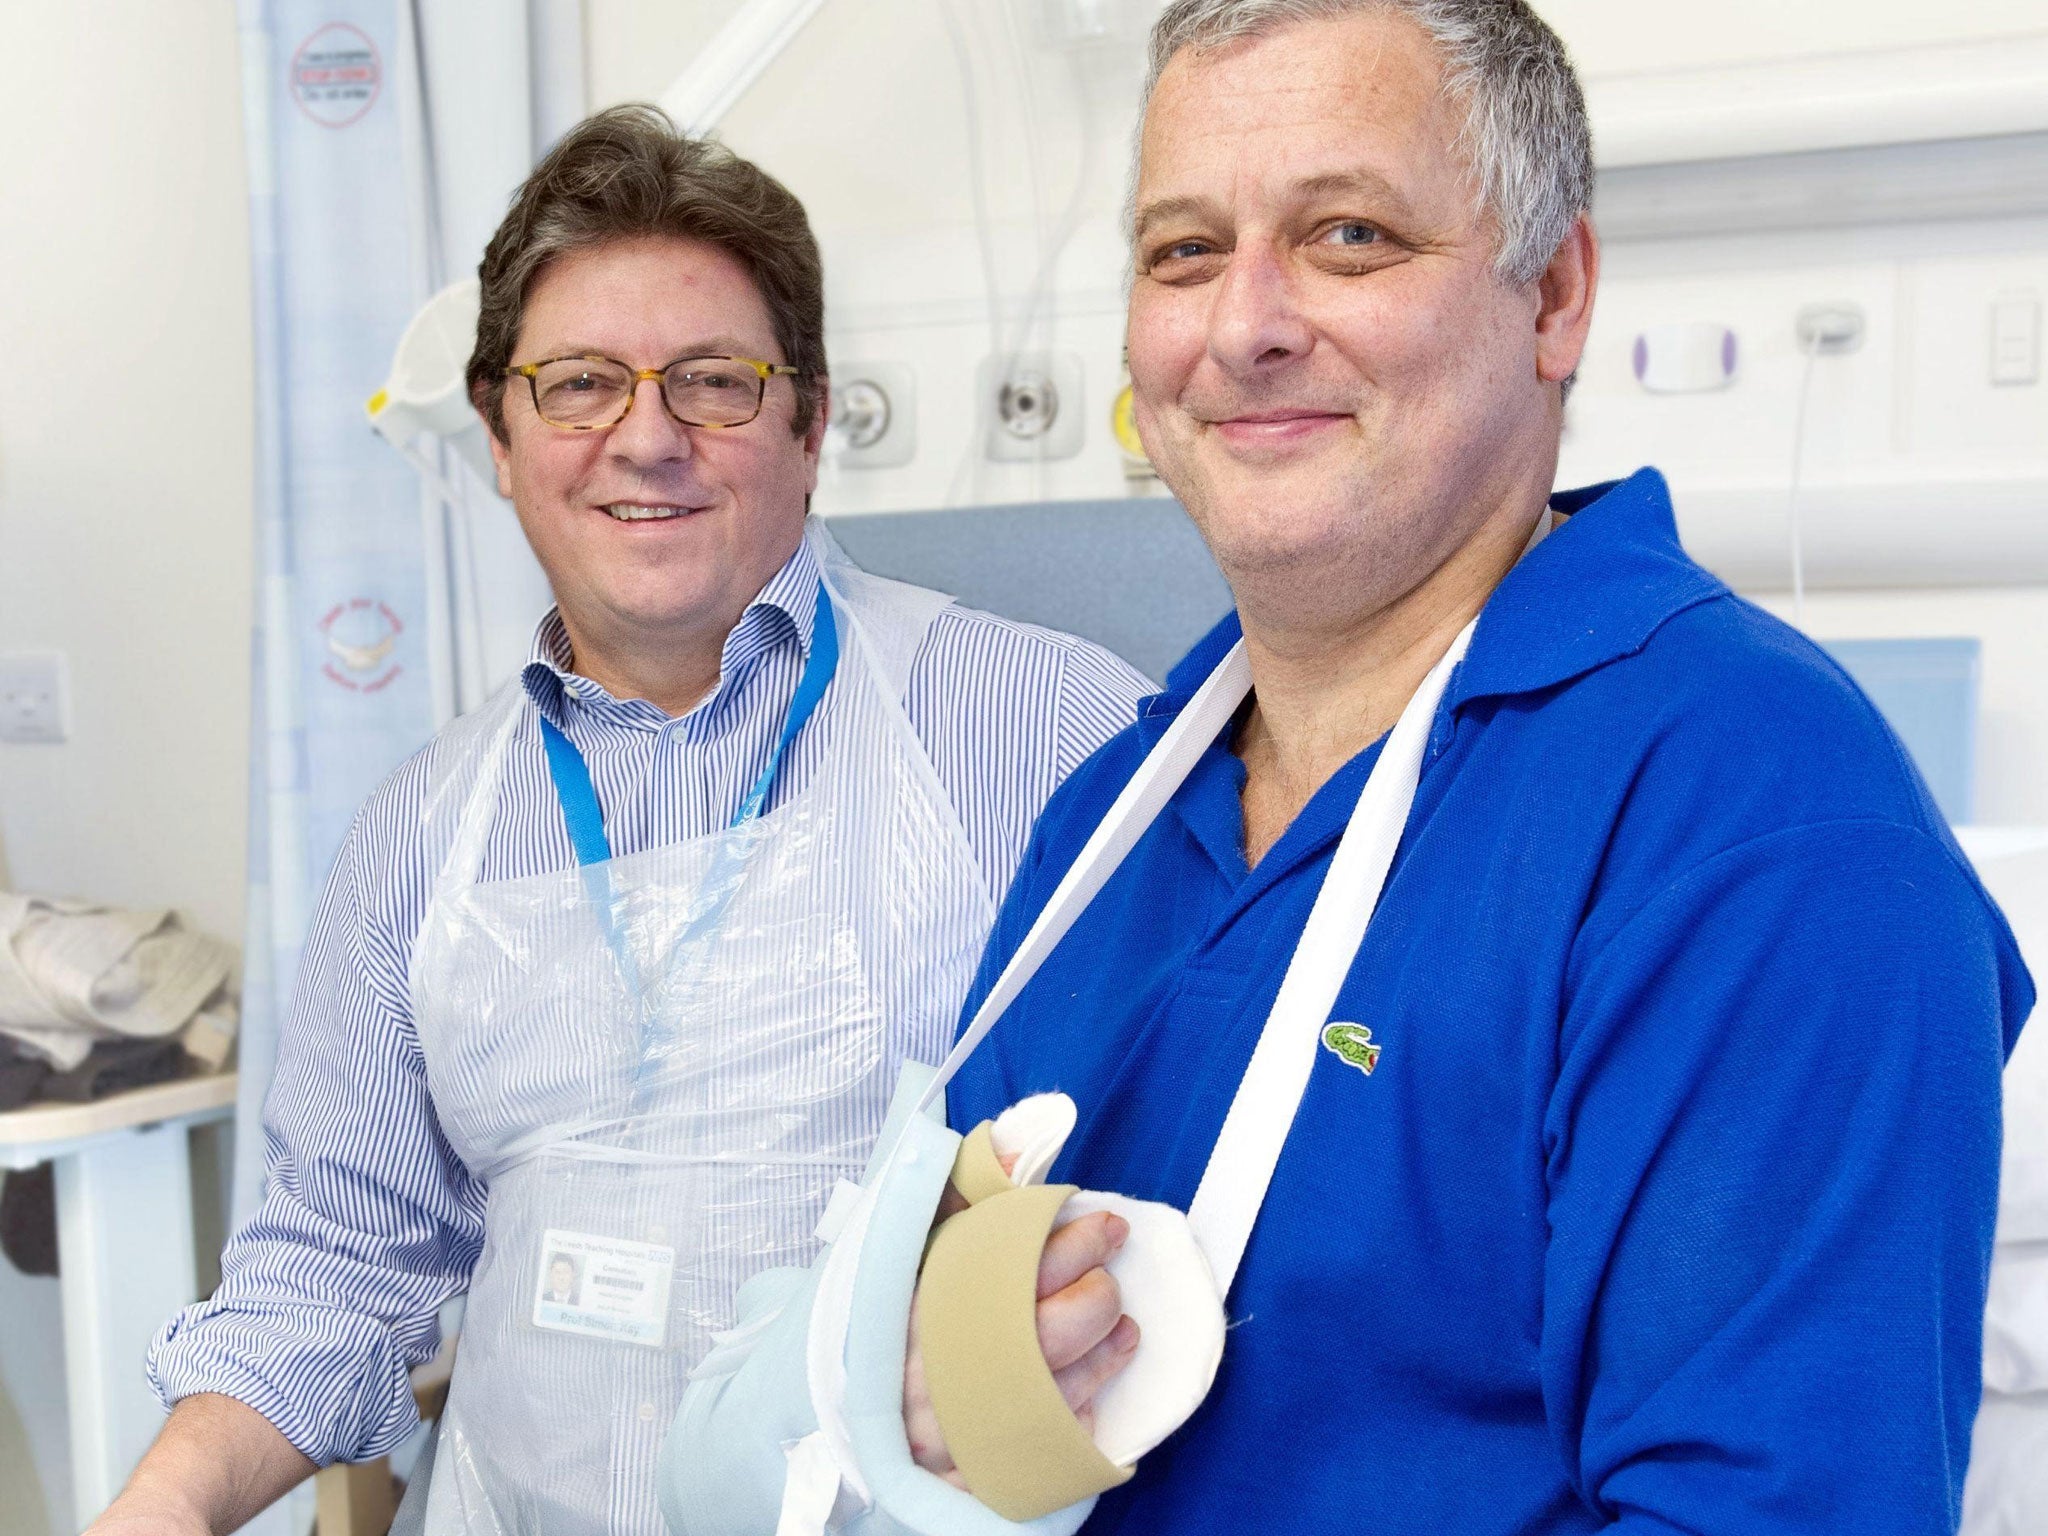 Dr Simon Kay, left, and his surgery patient Mark Cahill